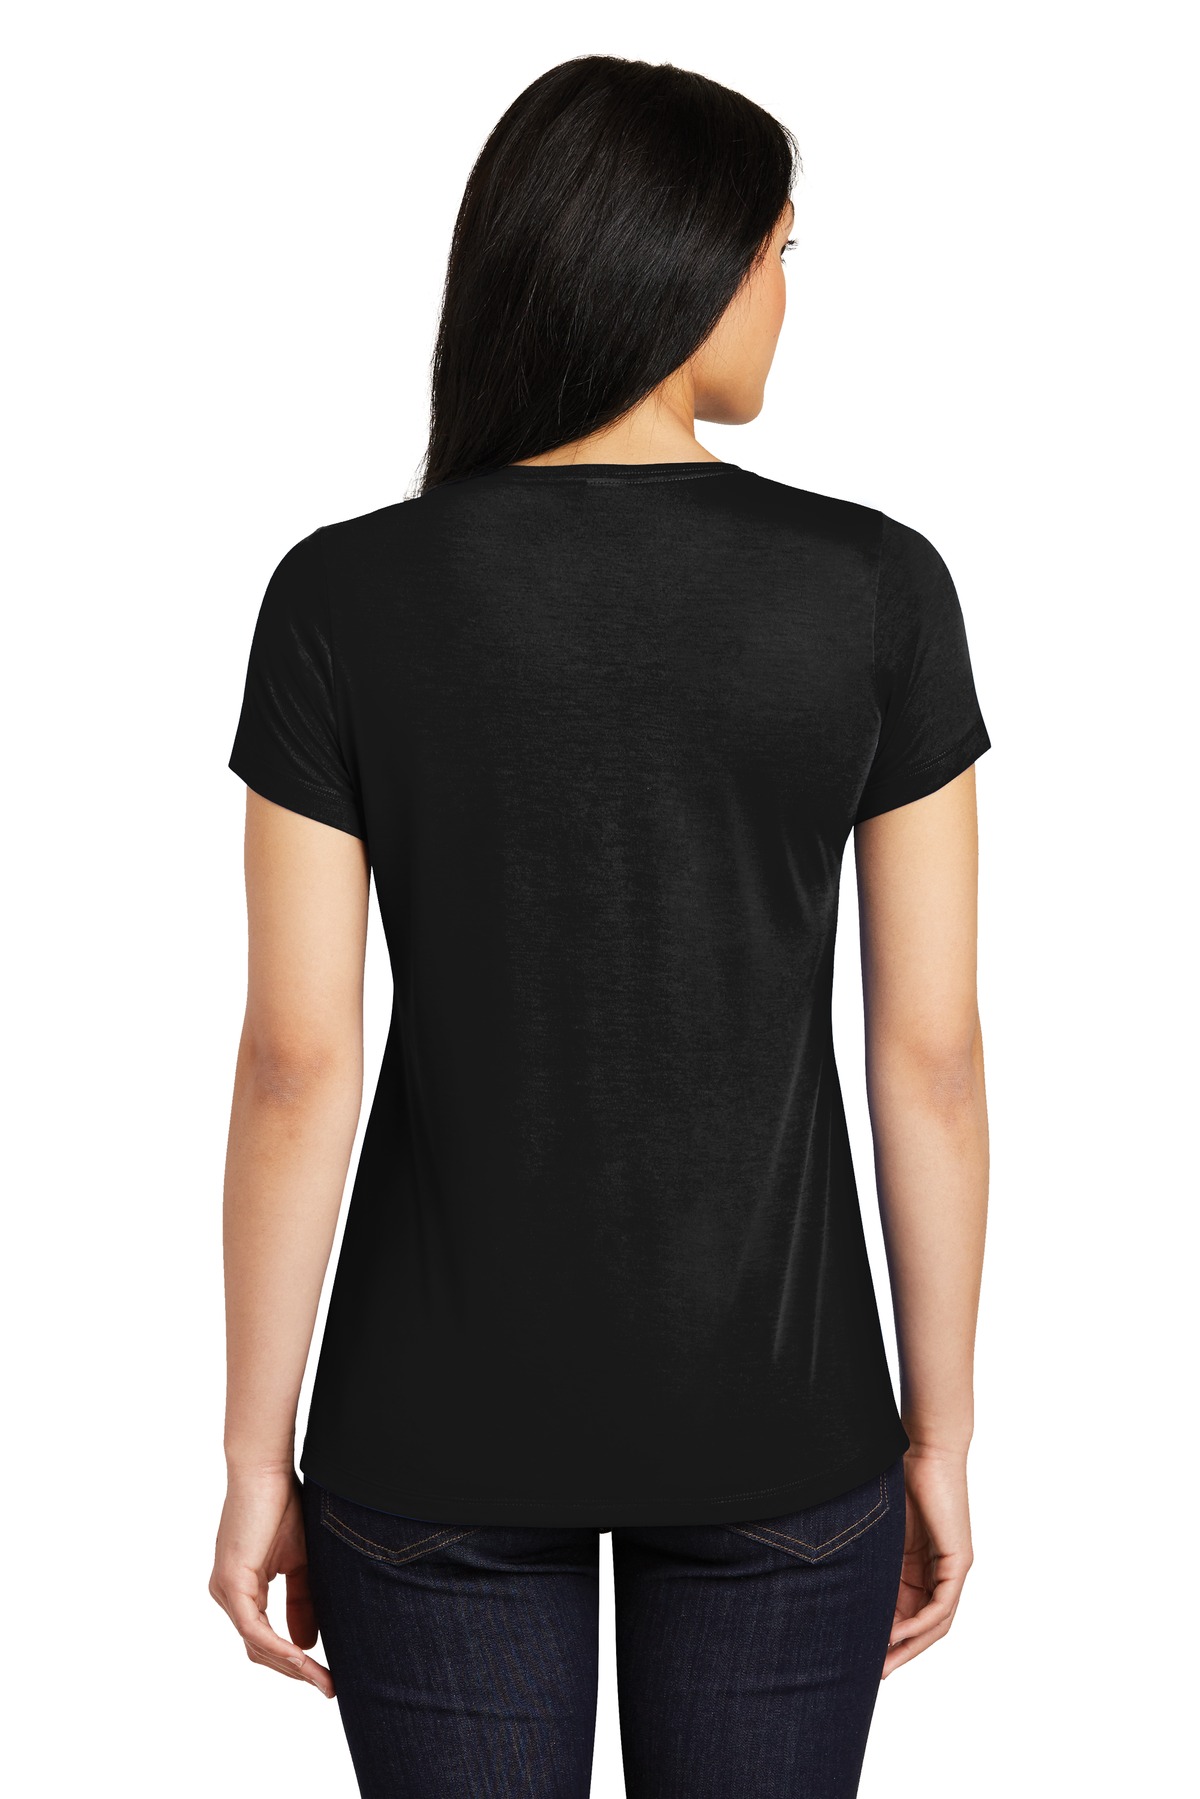 Sport-Tek ® Ladies PosiCharge ® Competitor ™ Cotton Touch ™ Scoop Neck ...